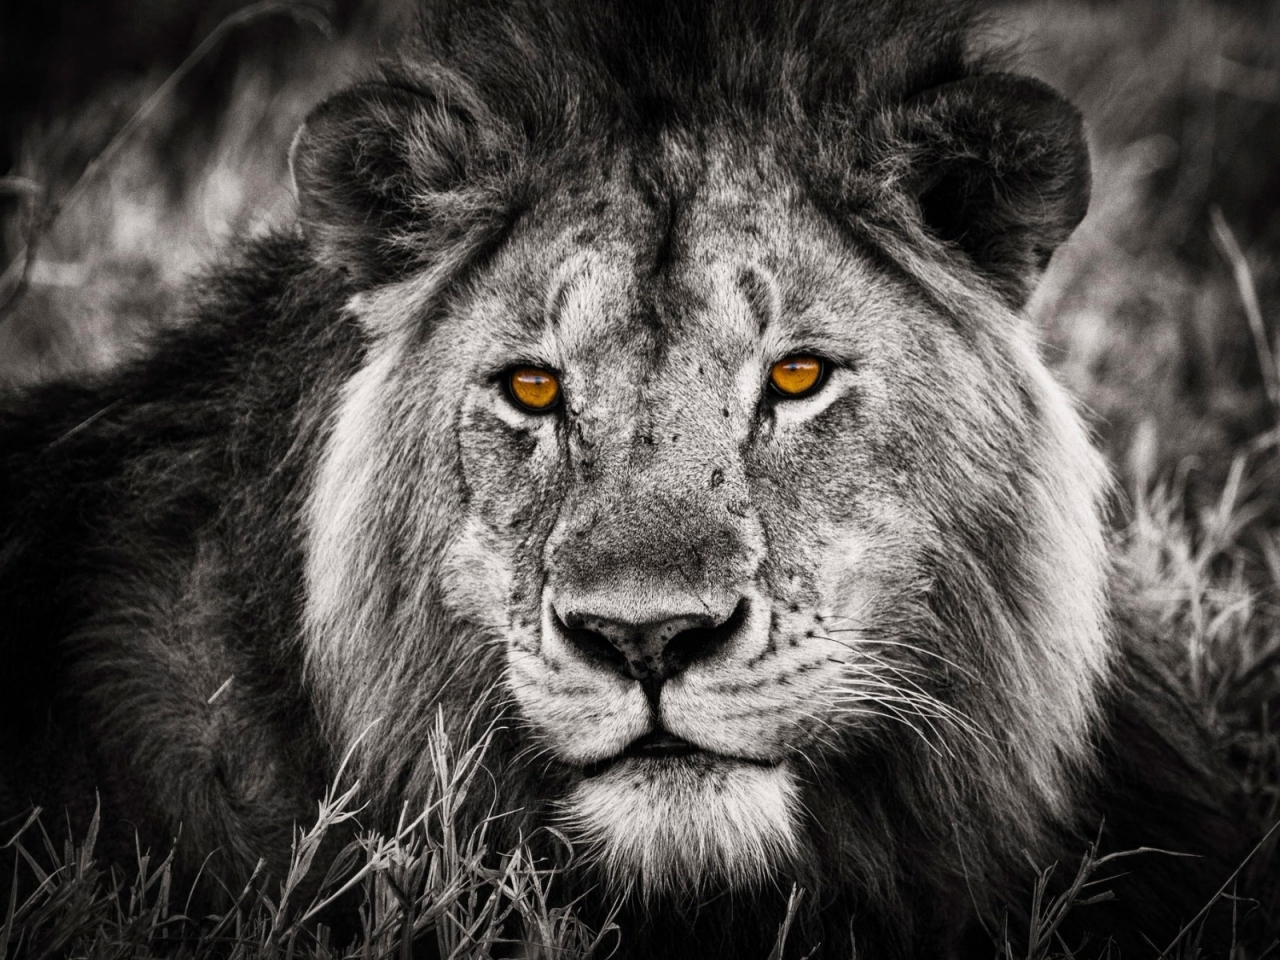 Black and White Lion Portrait for 1280 x 960 resolution